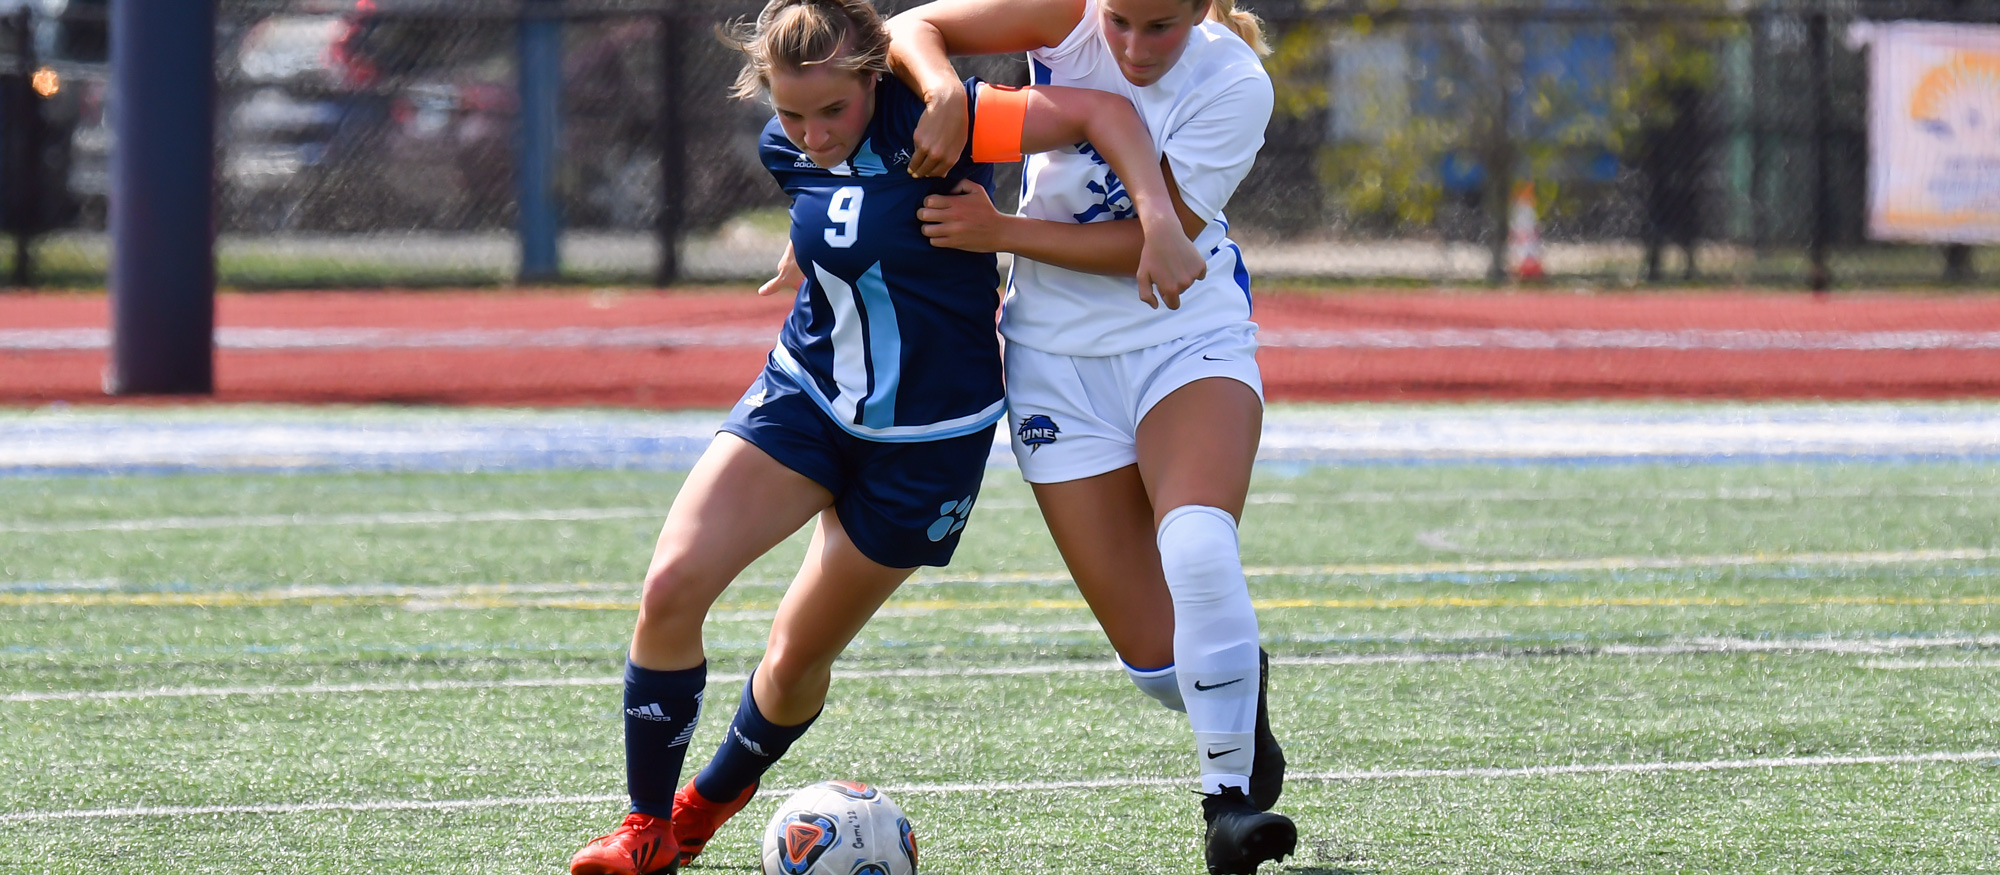 Fionna Kennedy and Mount Holyoke fell 1-0 at the Coast Guard Academy on Oct. 26, 2022. (RJB Sports file photo)